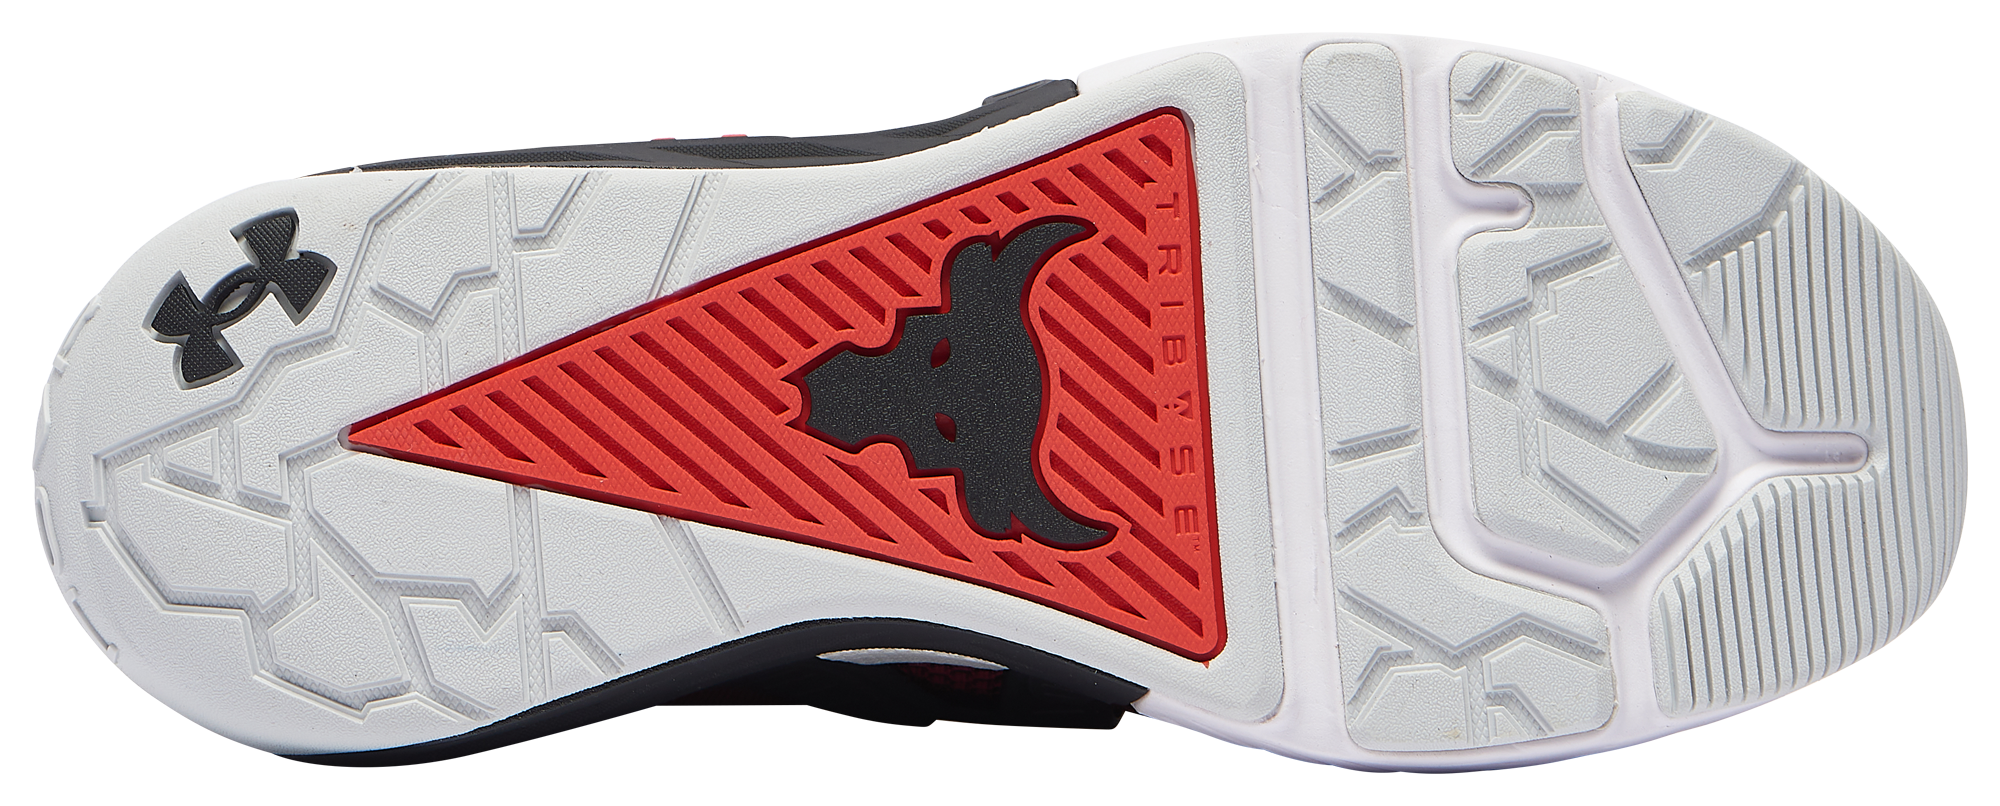 Fitness shoes Under Armour UA W Project Rock 4